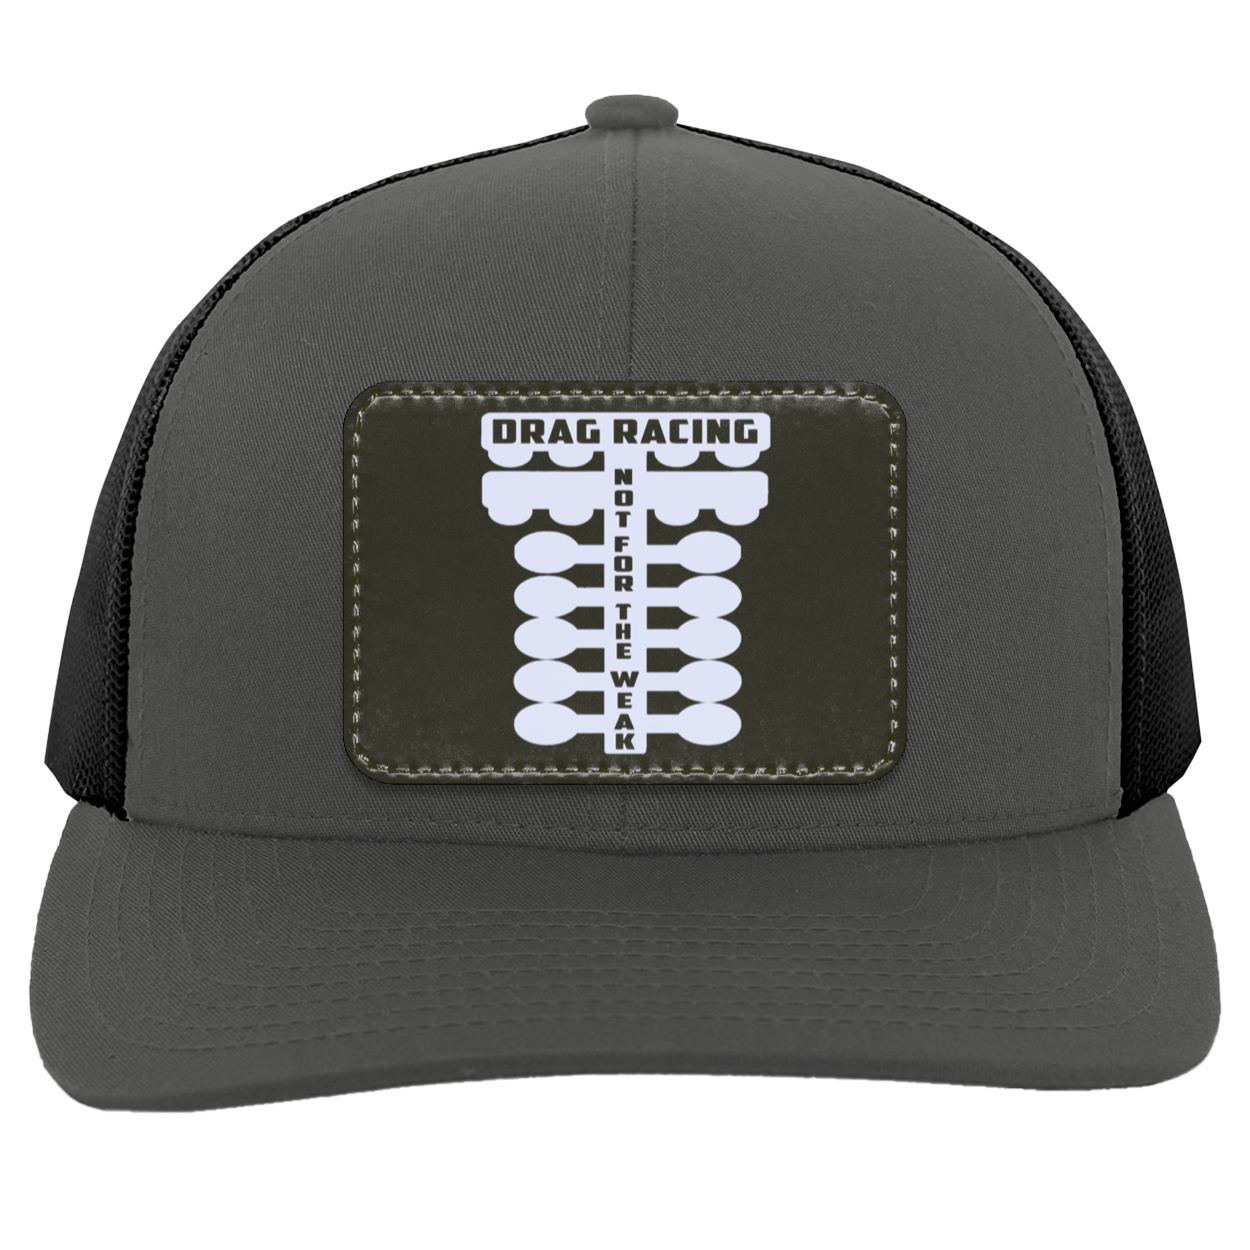 Drag Racing Not For The Weak Trucker Patched Snap Back V1